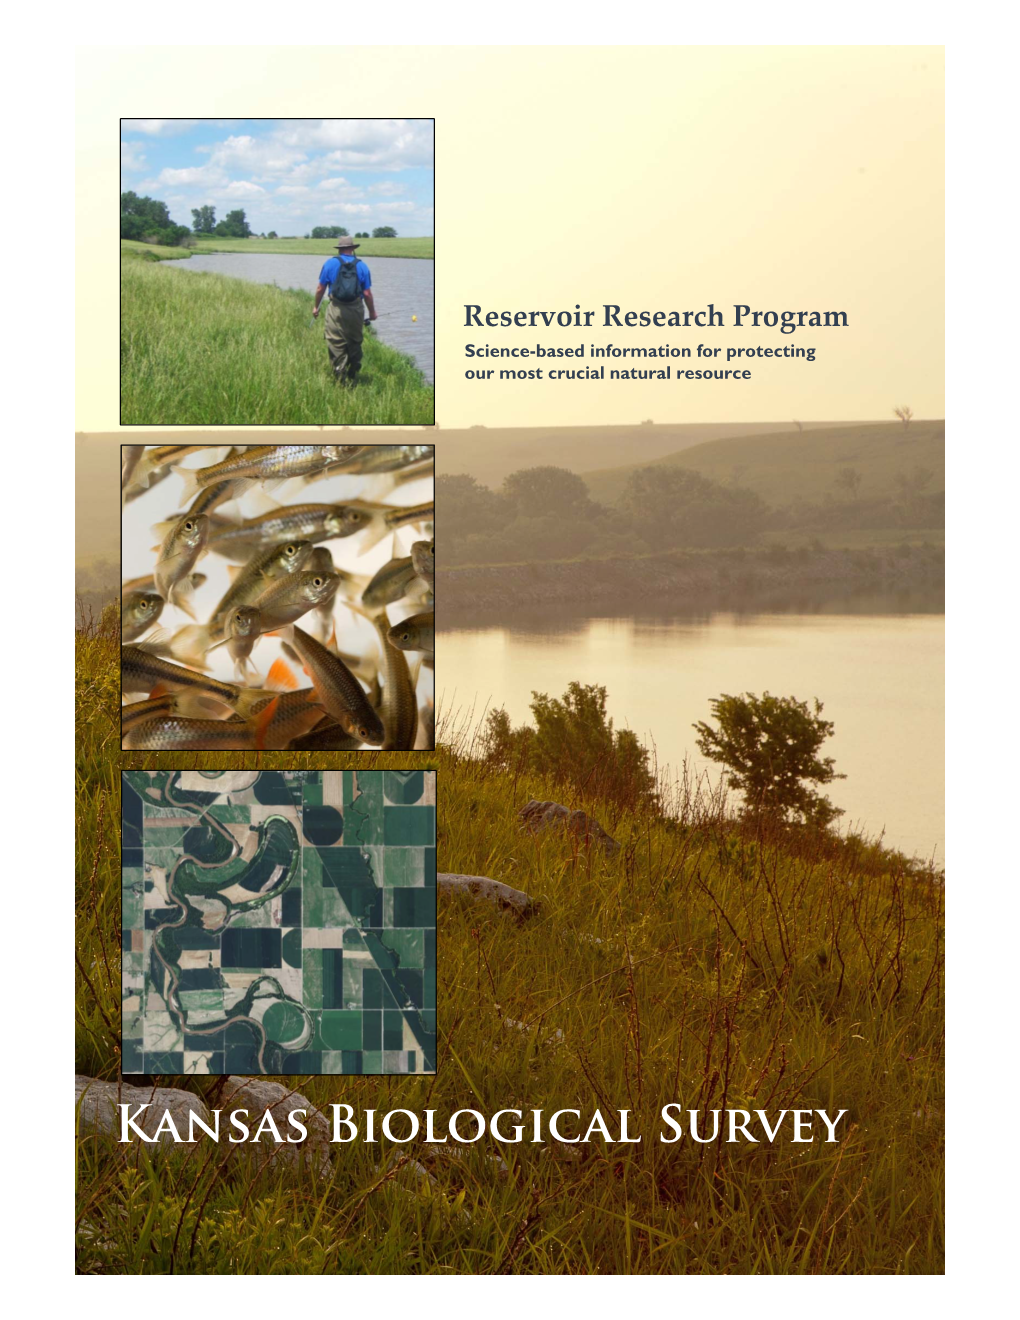 Reservoir Research Program Science-Based Information for Protecting Our Most Crucial Natural Resource